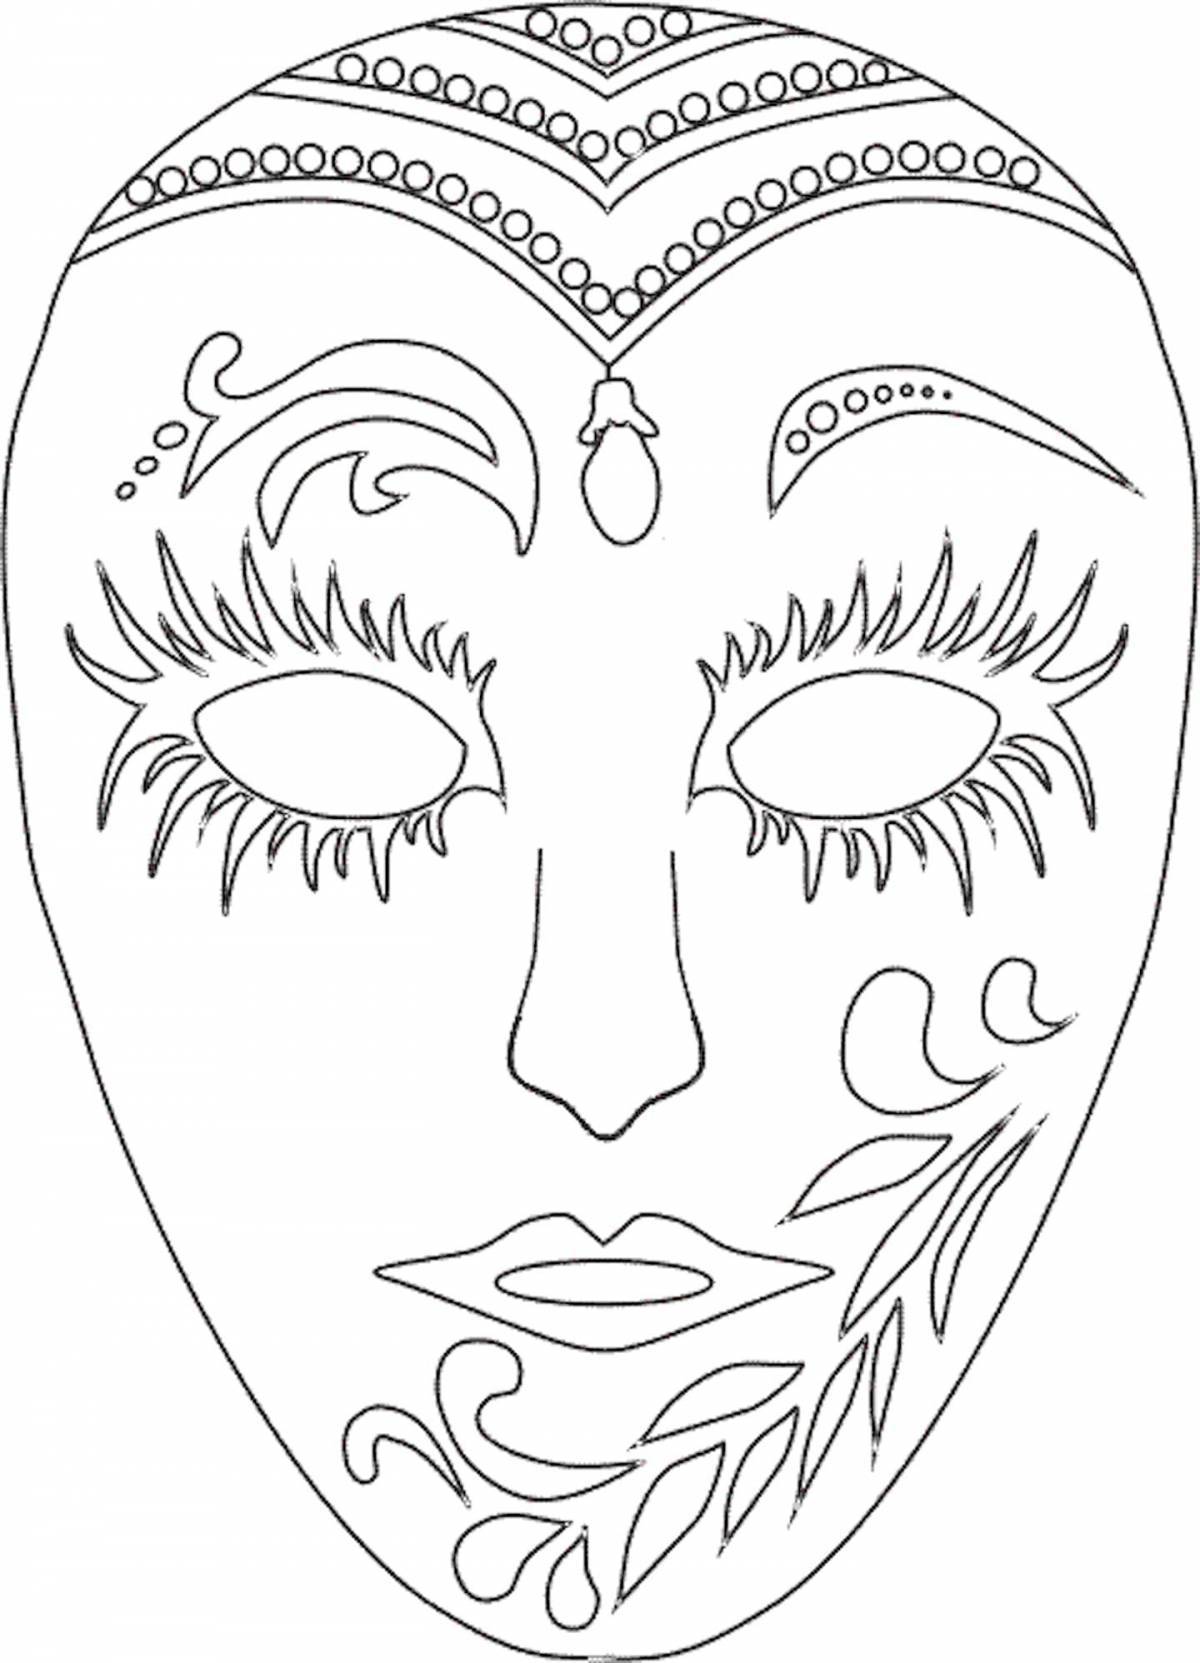 Luminous face mask coloring page